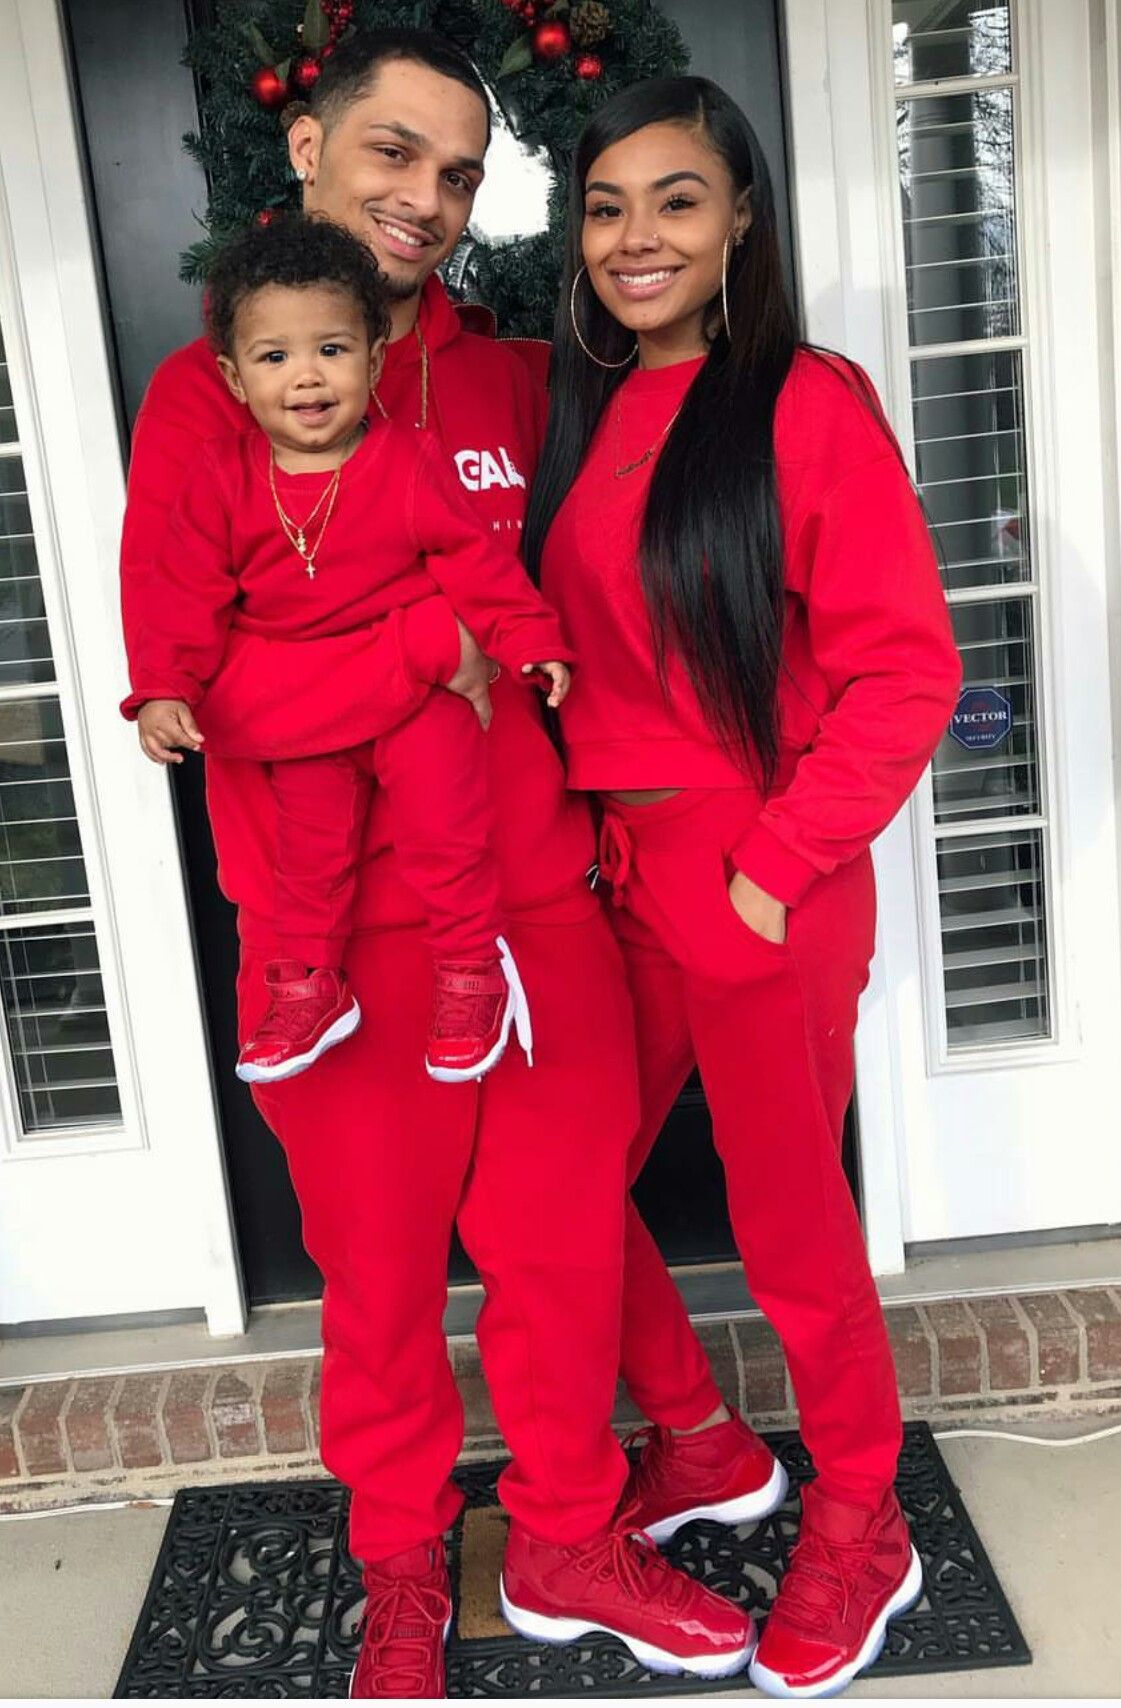 Matching Outfits.. 70+ Best Family Photoshoot Outfit Ideas That You Must Check - 18